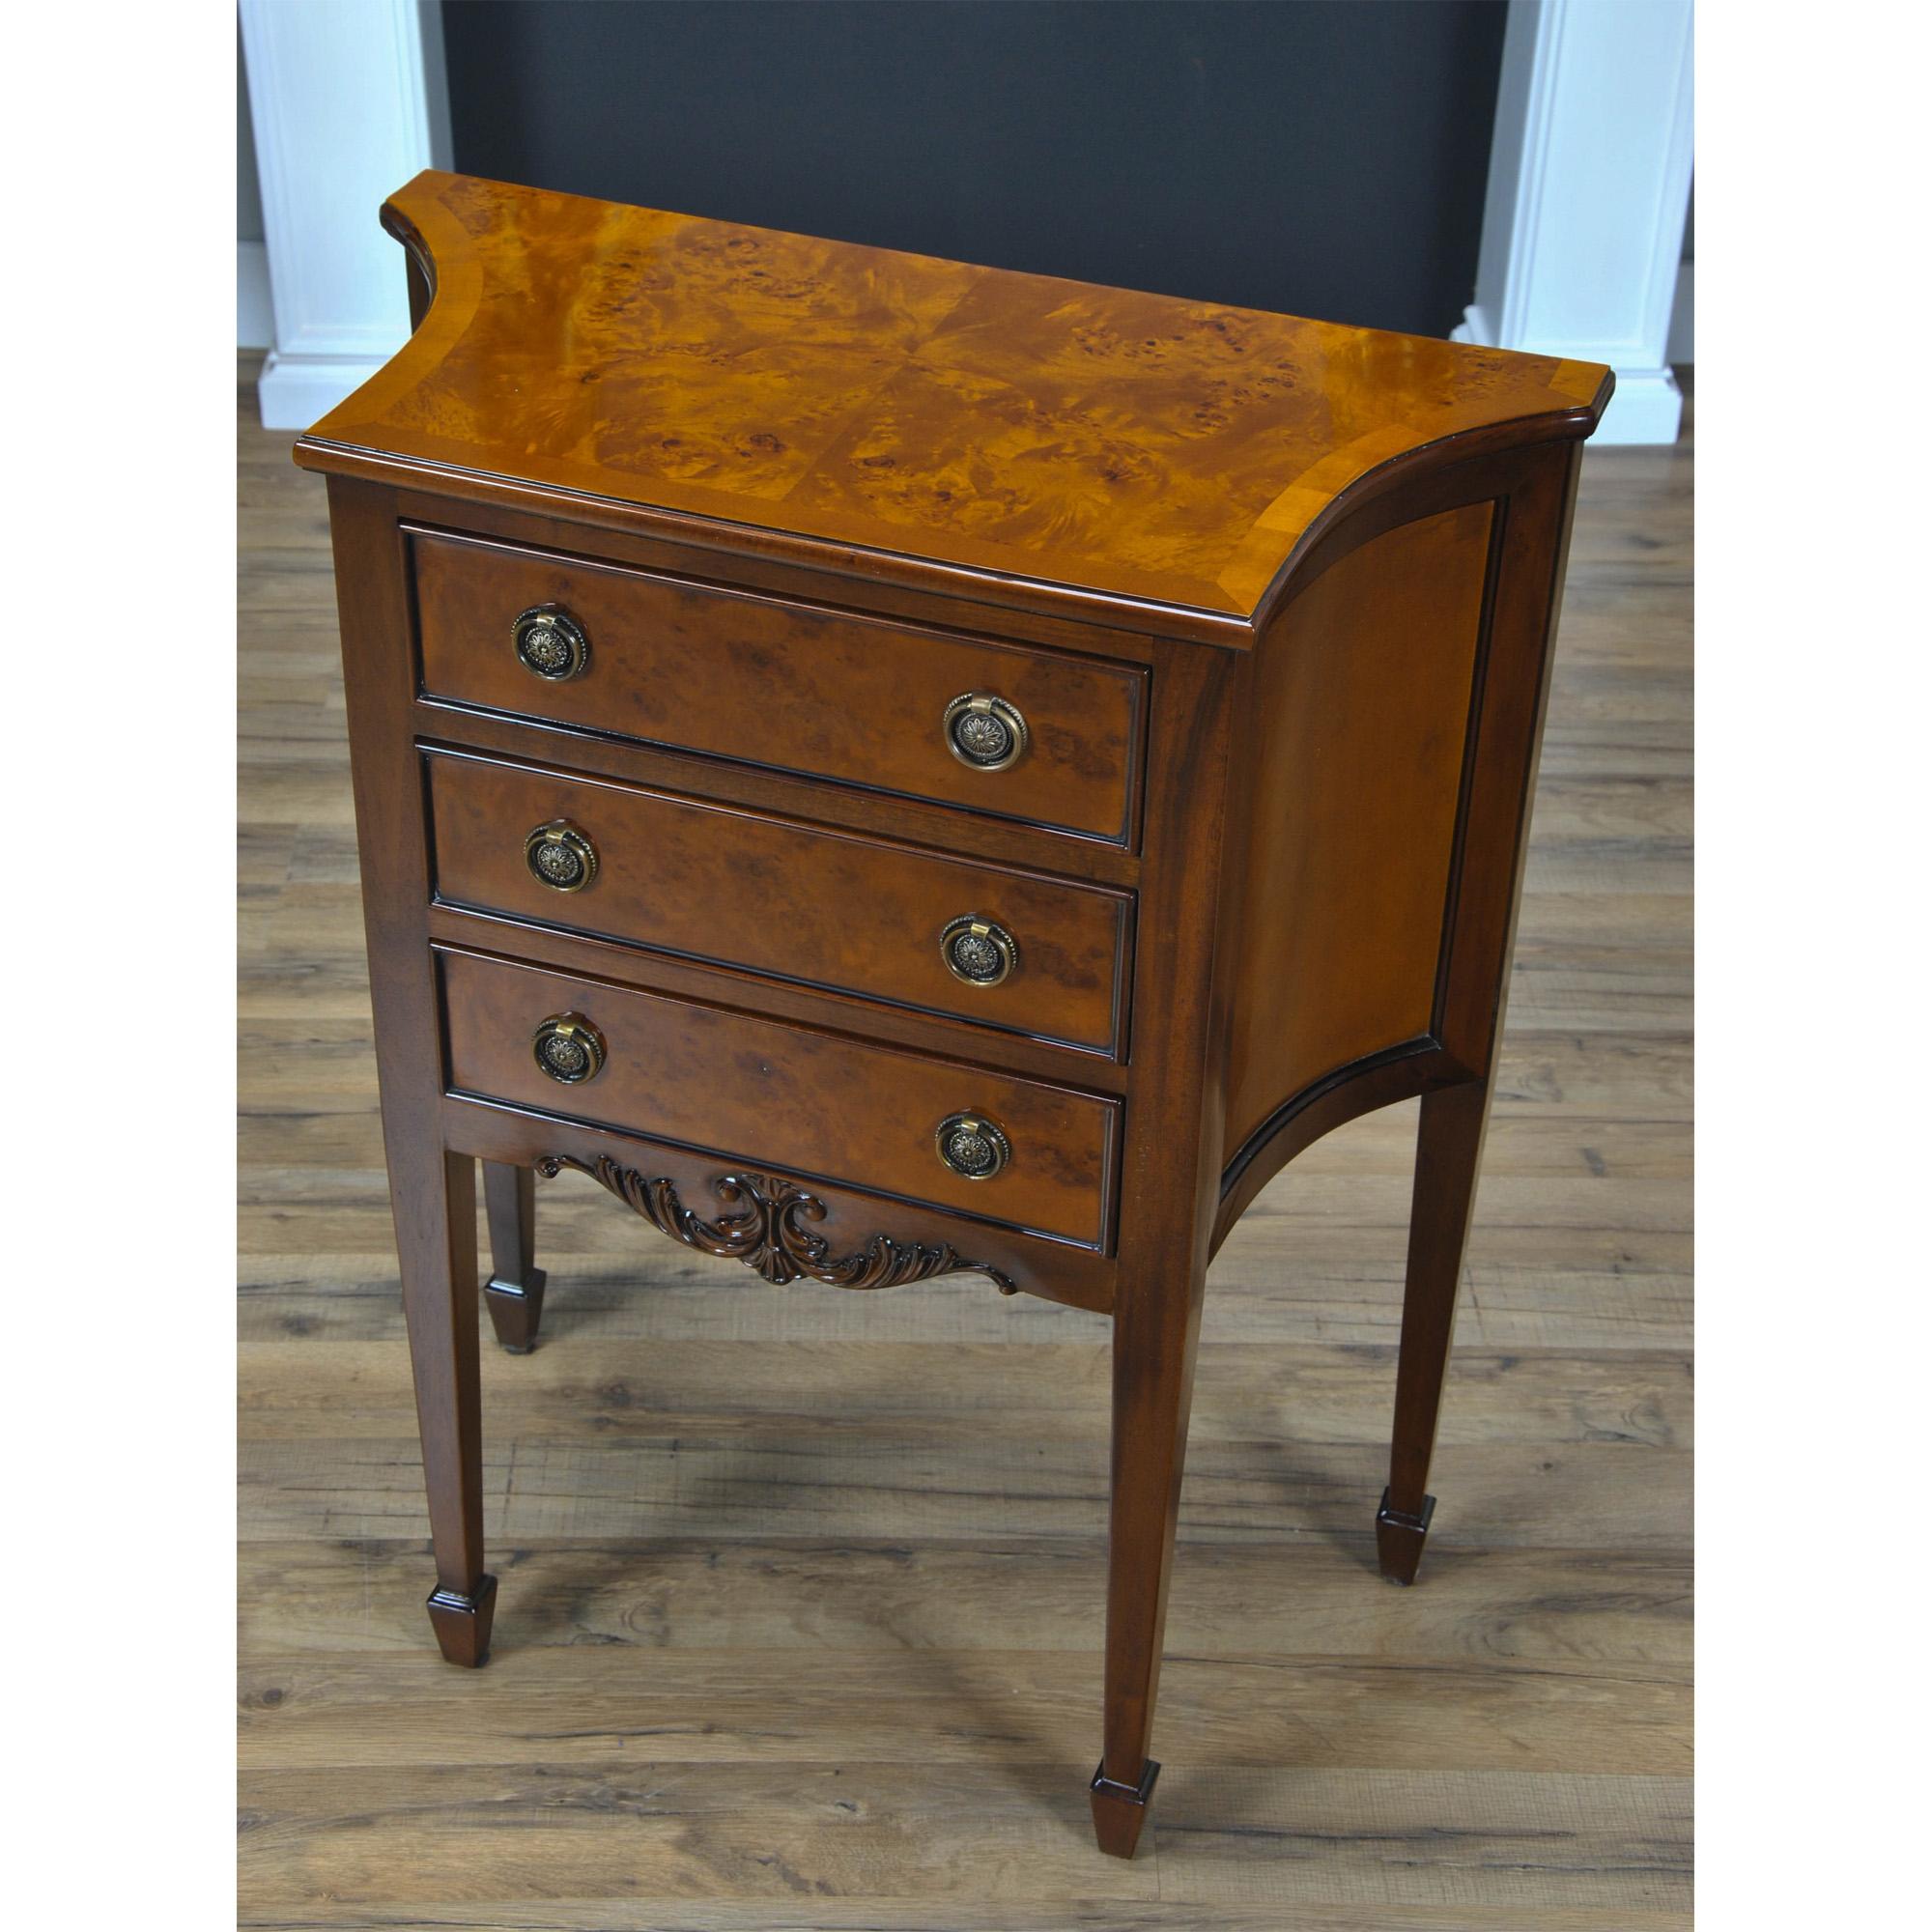 A Hepplewhite inspired Burled Commode great for use as a side table or entry way piece. The three drawers are dovetailed and feature designer style hardware, the shaped sides lend elegance and style to any room. Produced by Niagara Furniture the